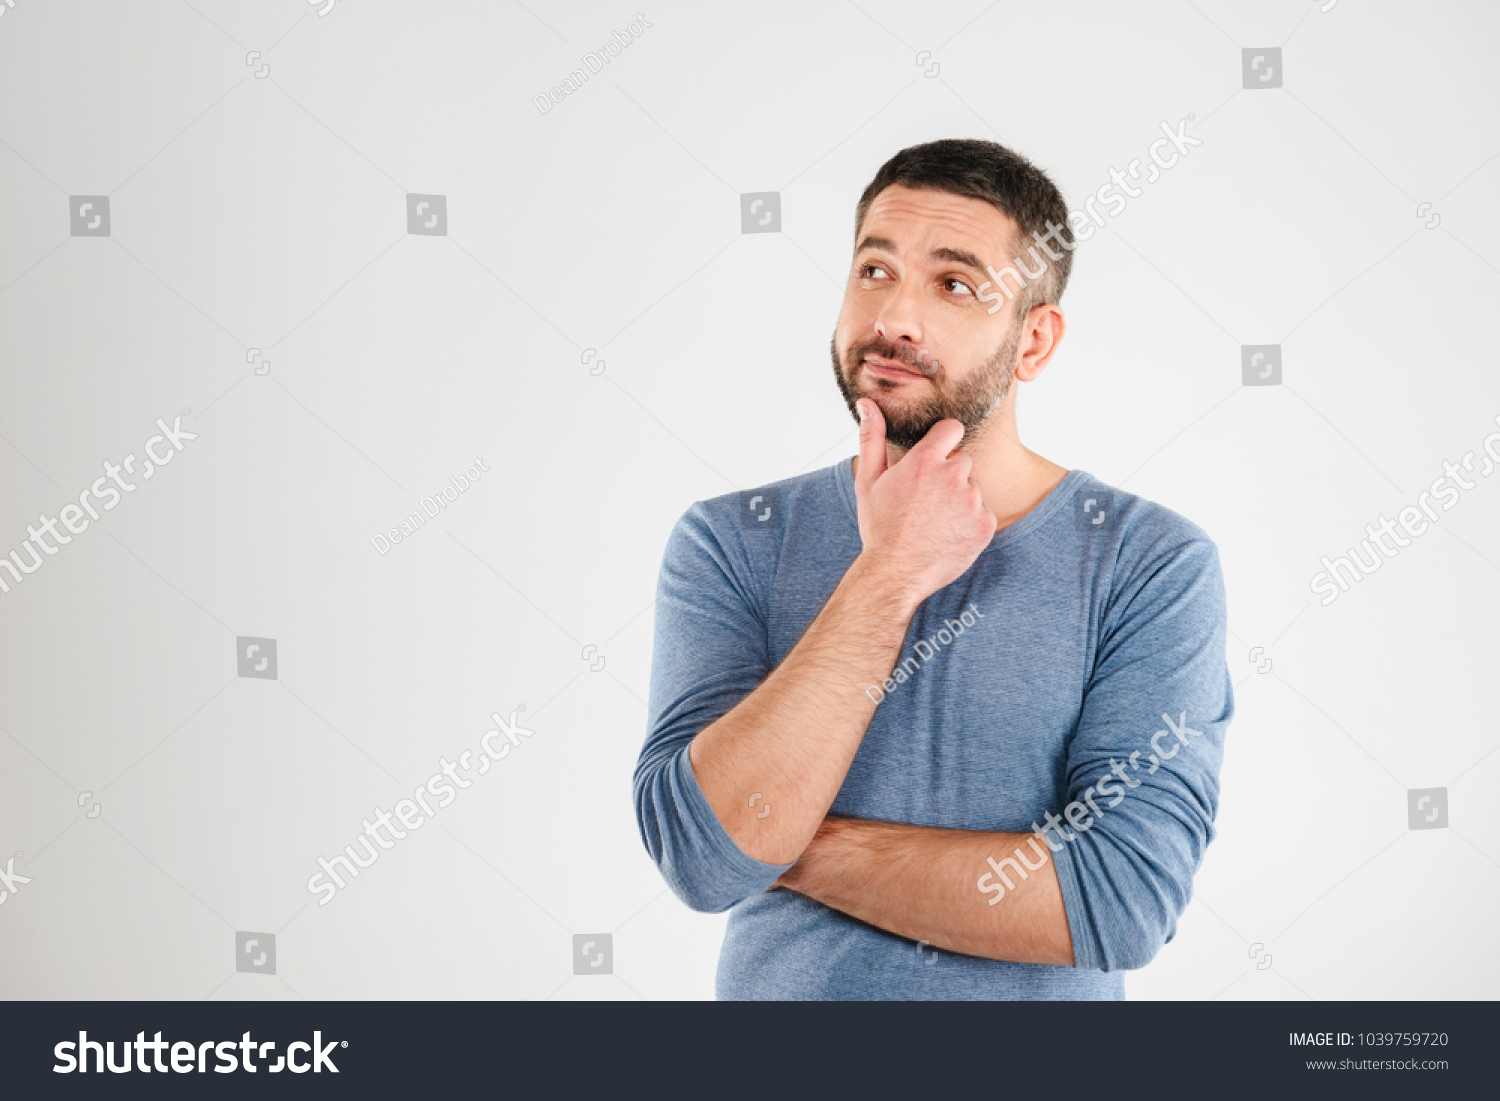 Photo of thoughtful man isolated over white background wall. Looking aside. #1039759720